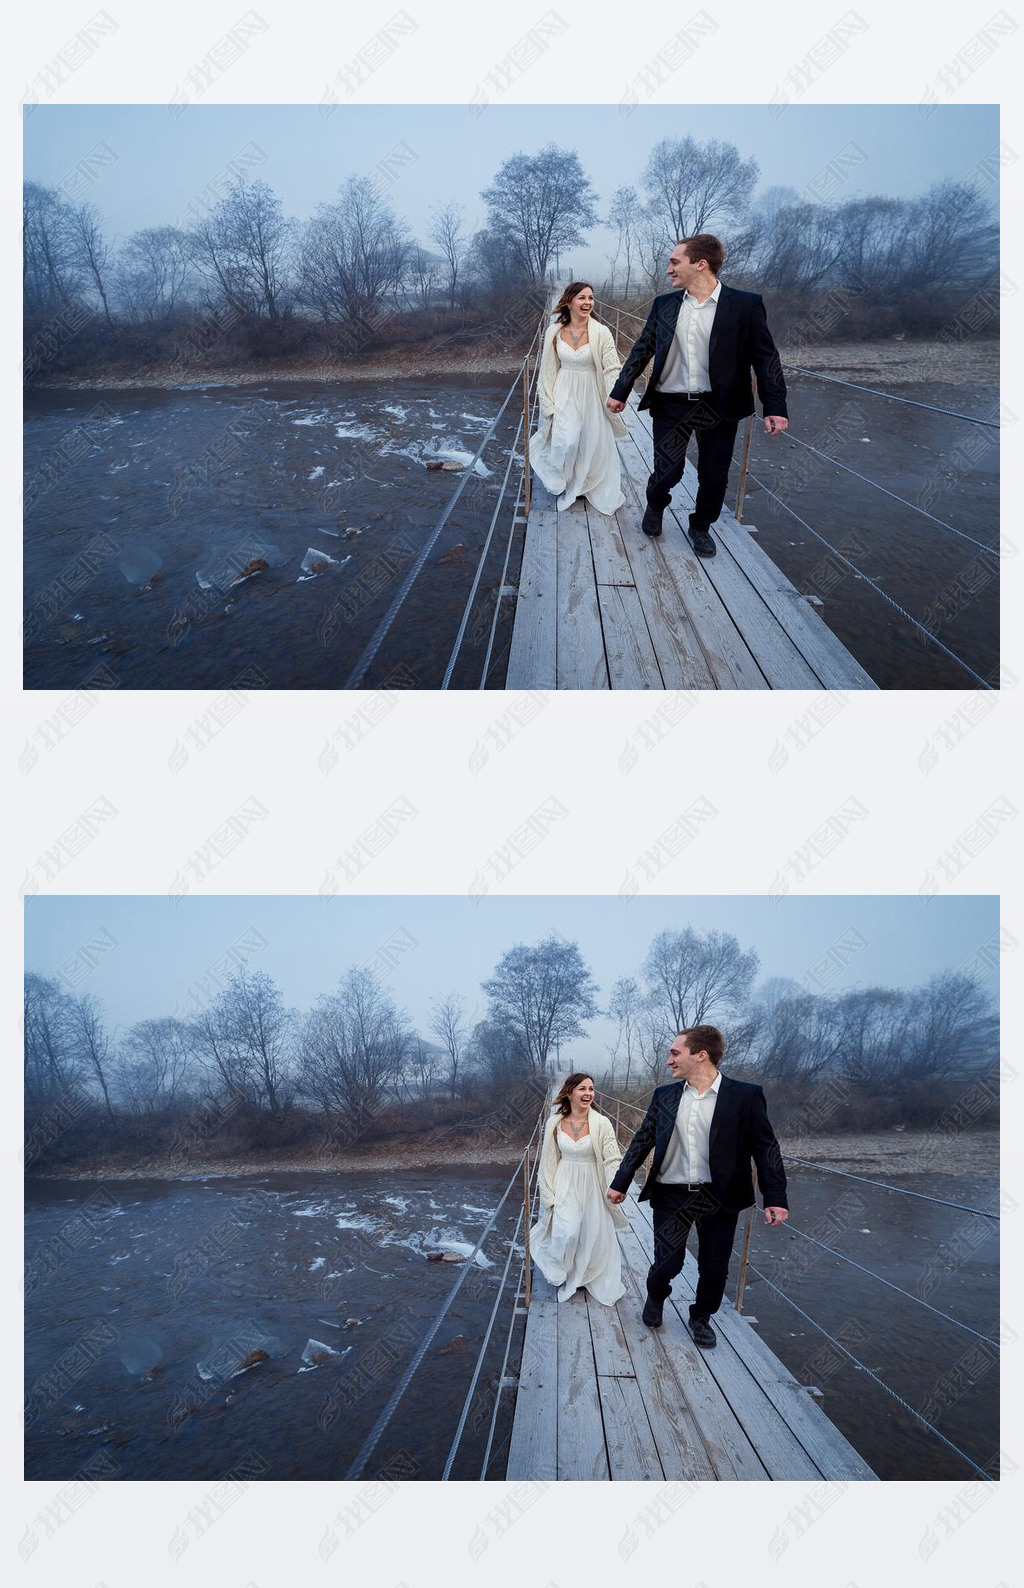 Happy wedding couple laughing and hing fun on the suspension bridge in mountains